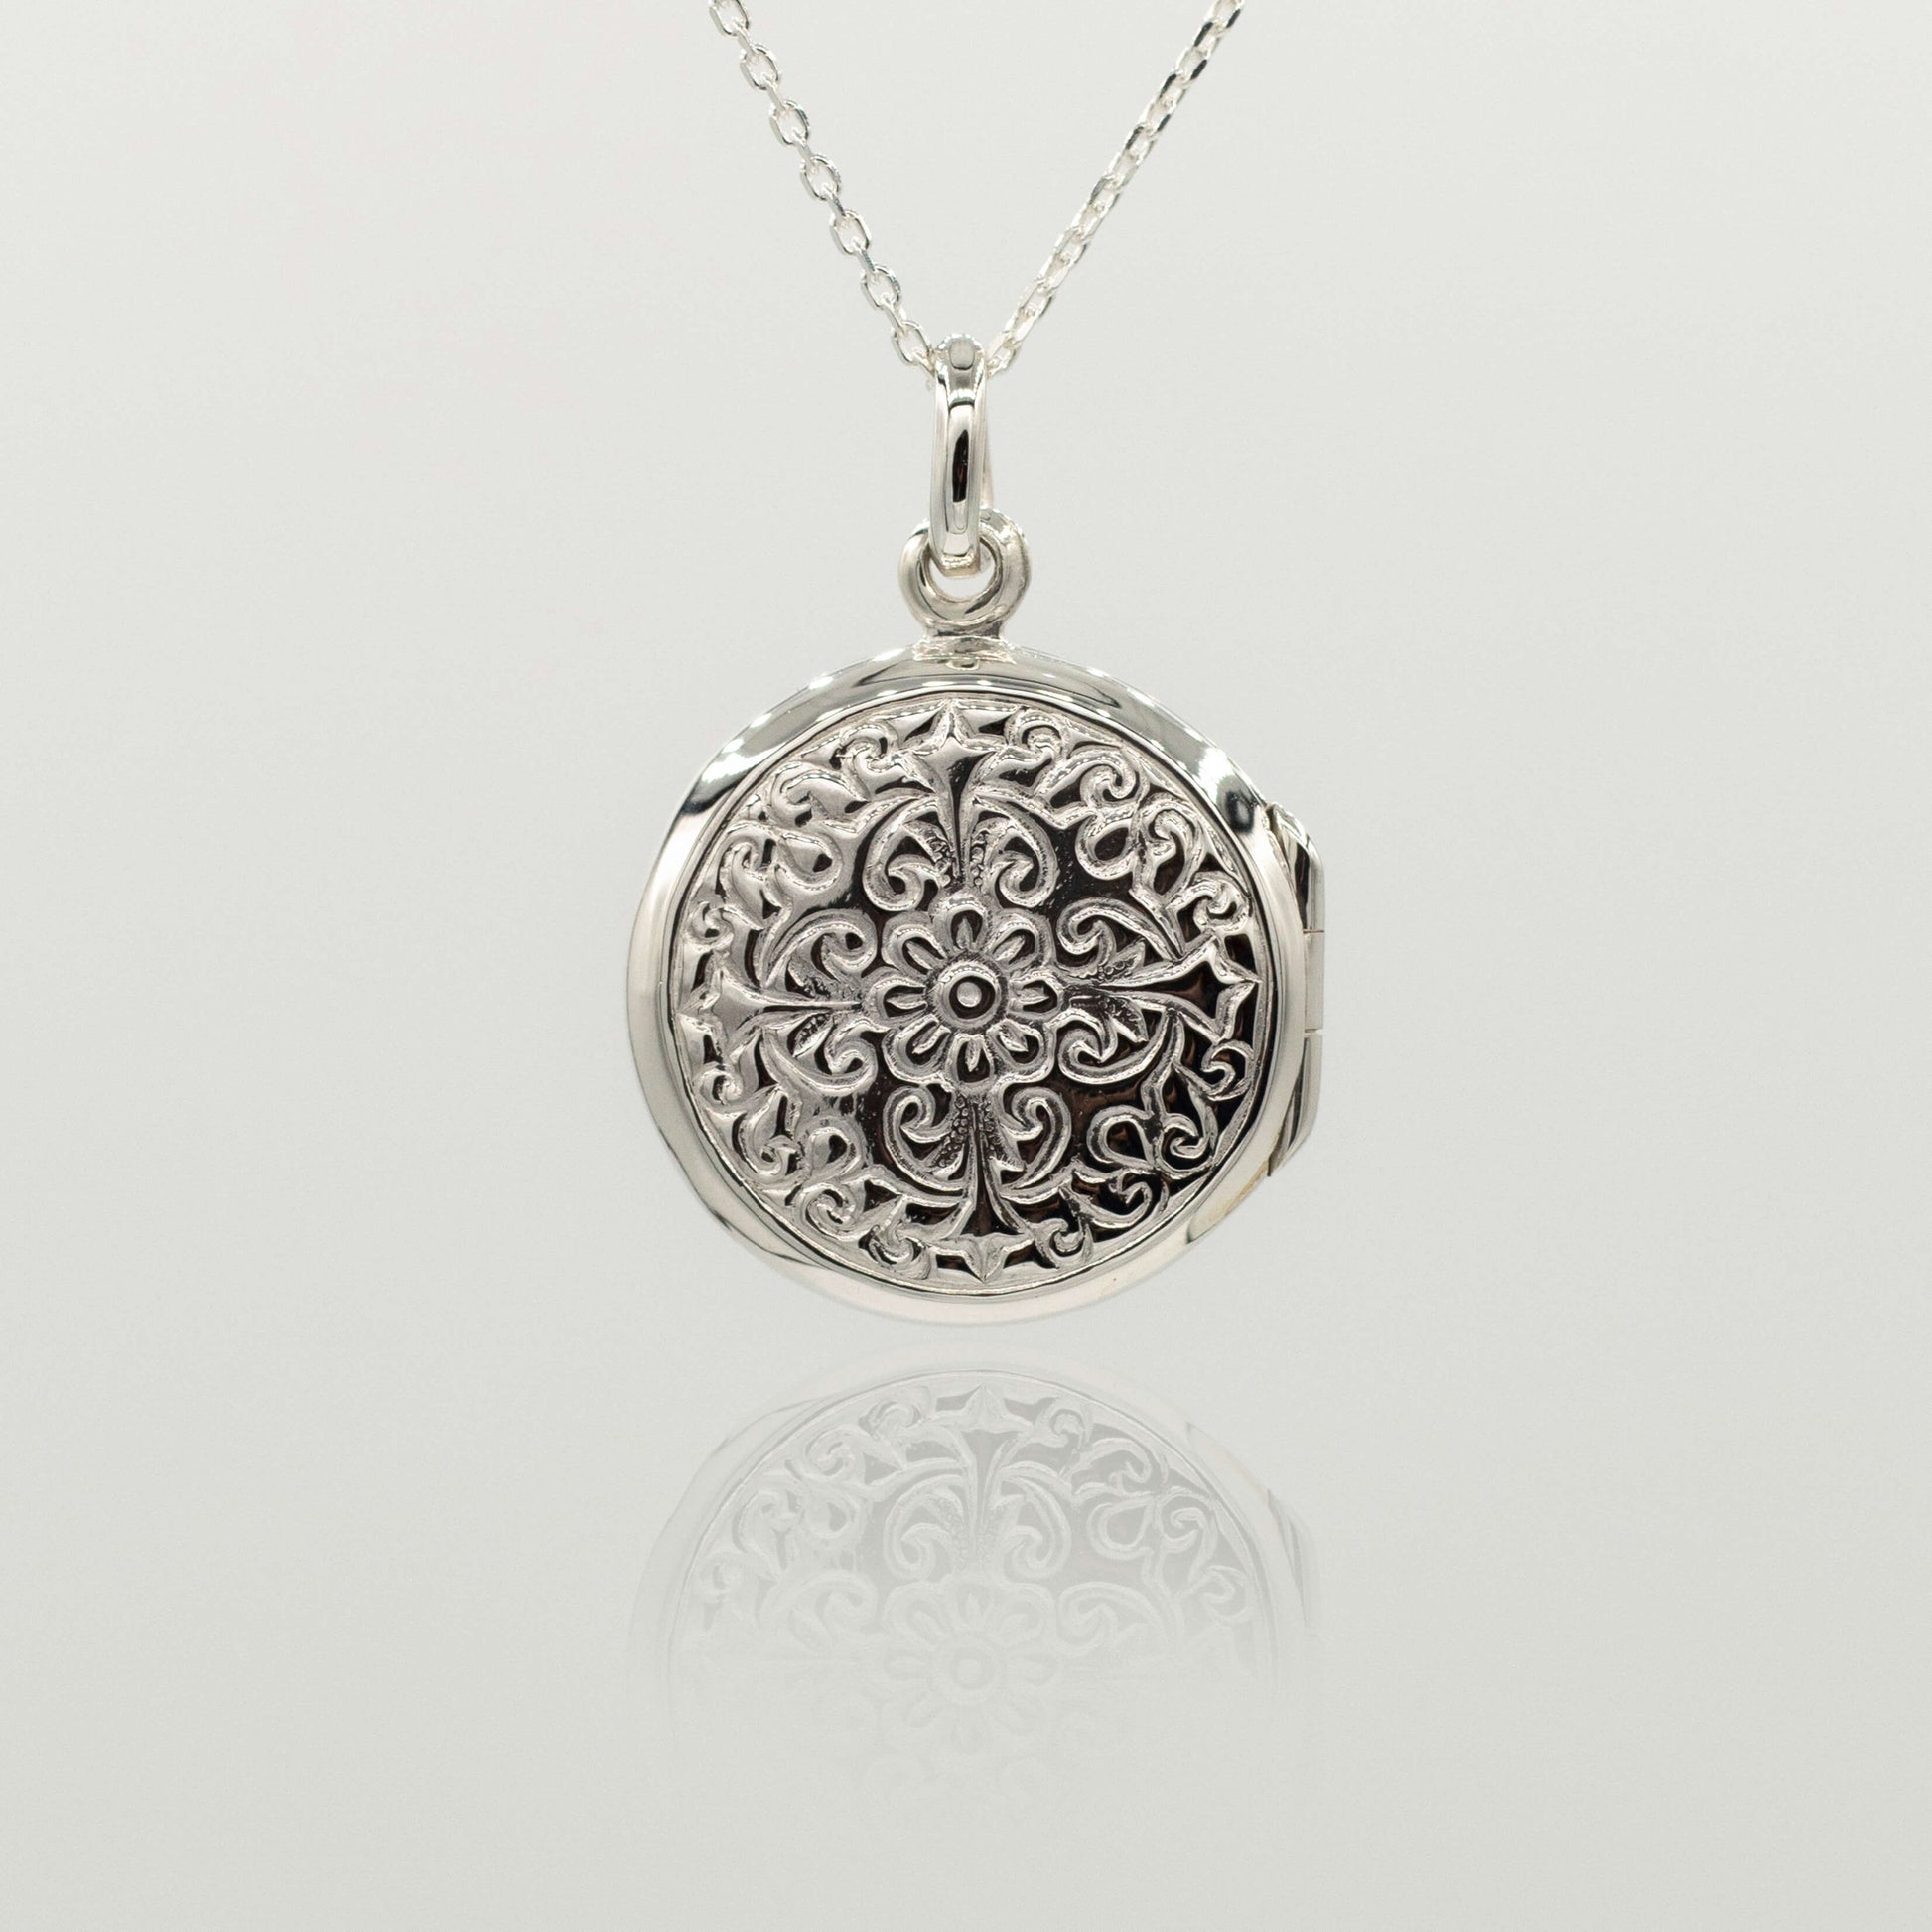 sterling silver ornate round shaped locket with intricate design close up